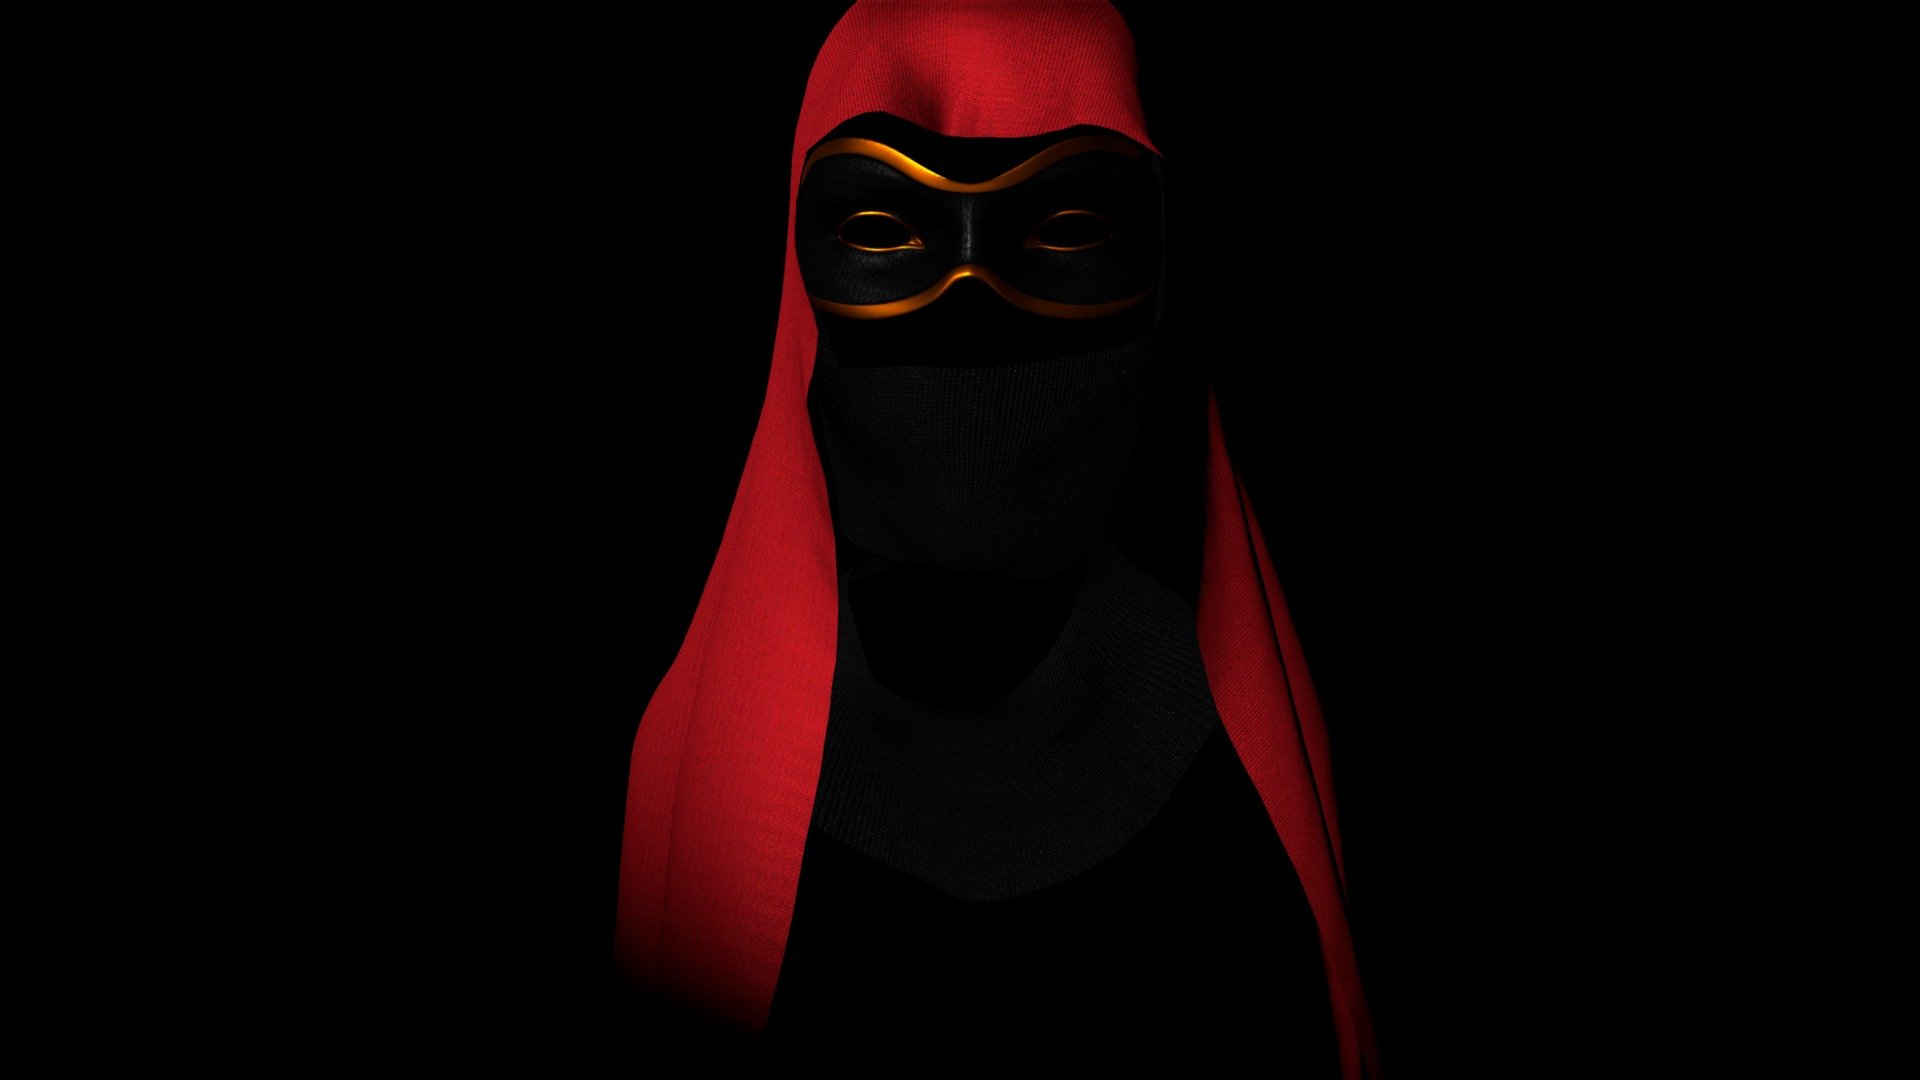 Mysterious masquerade. Decided to make model for the sketchfab cloth challenge and play with Blenders cloth simulation with wind. This kind of scene has been in my mind a longer now and the cloth/wind really makes it alive :) - Masquerade - 3D model by SpaNieLa (@panu117) 3d model